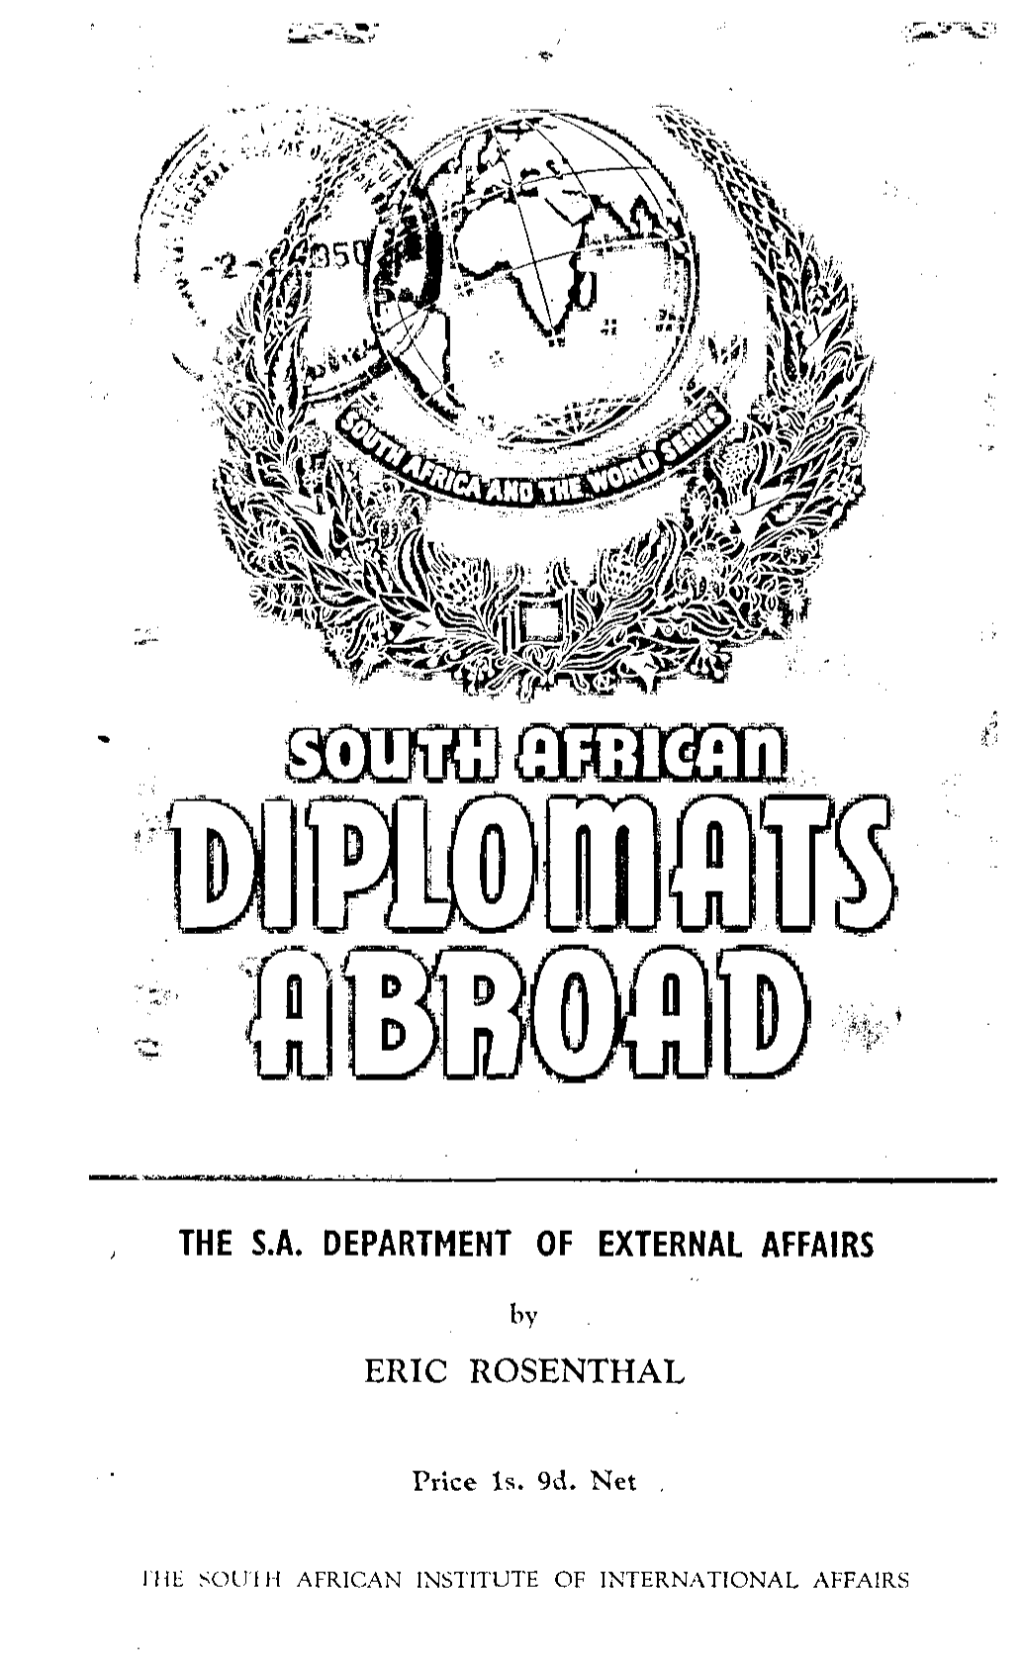 The S.A. Department of External Affairs